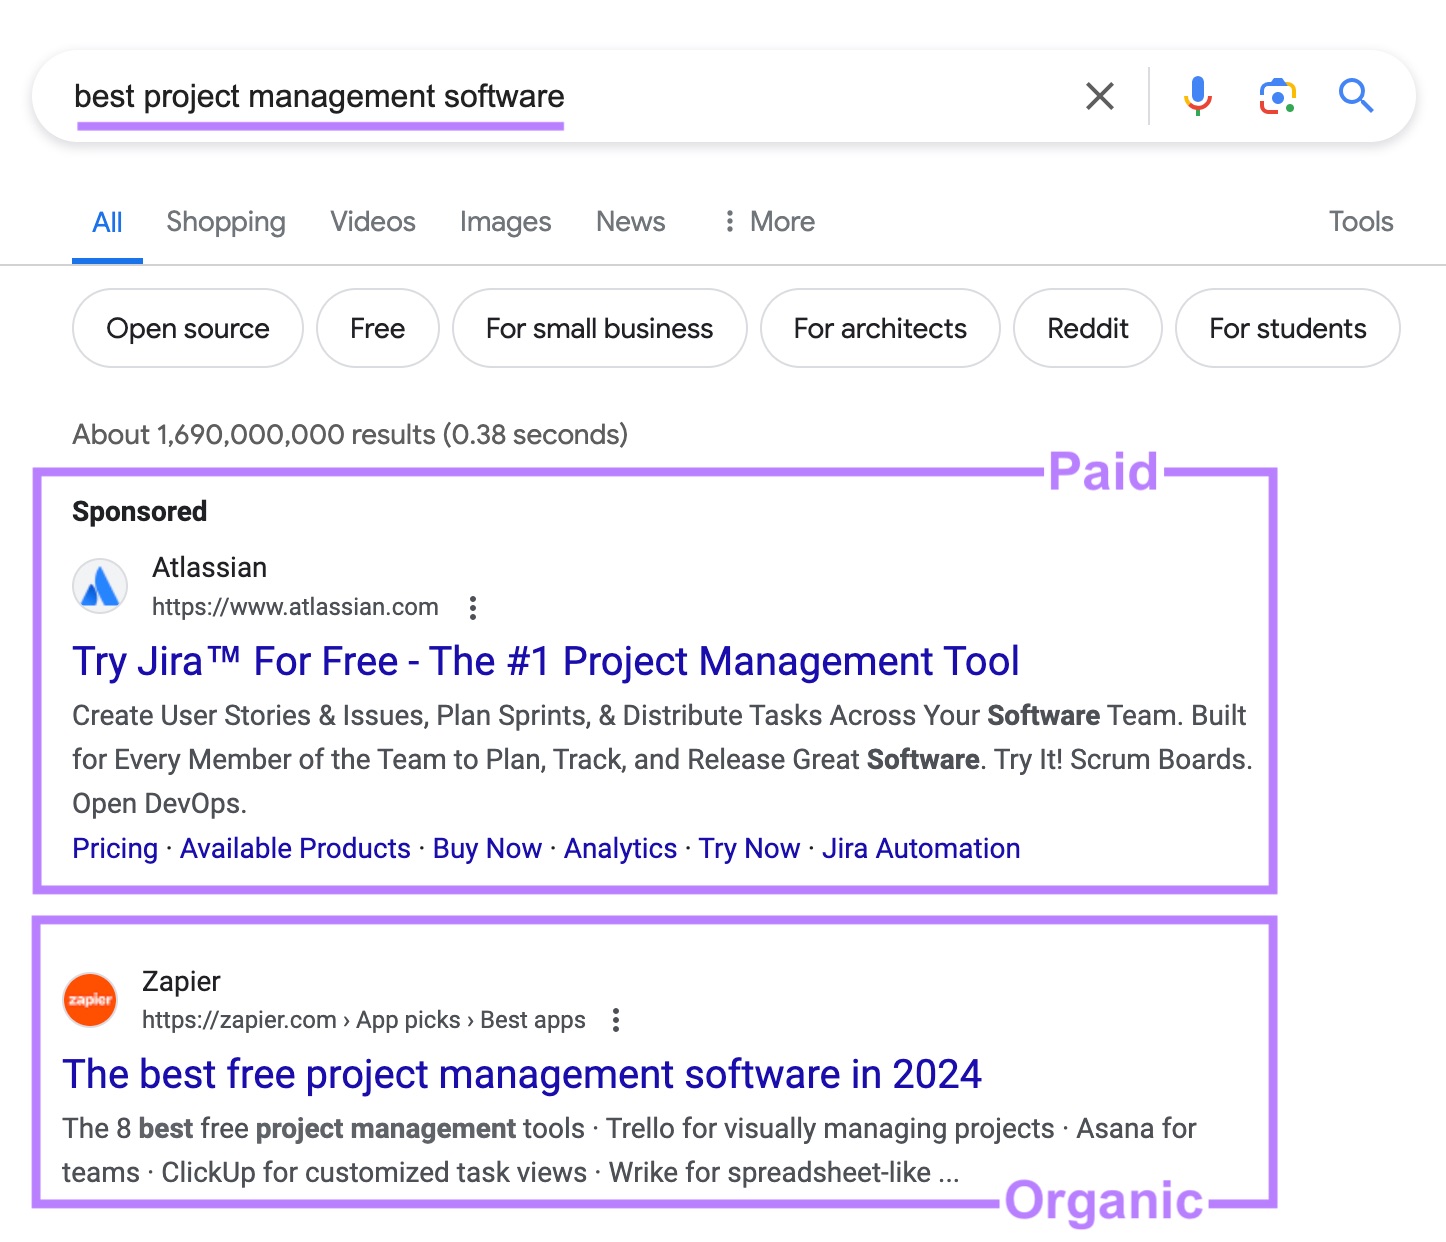 Google search results for "best project management software" showing a sponsored and an organic search result.